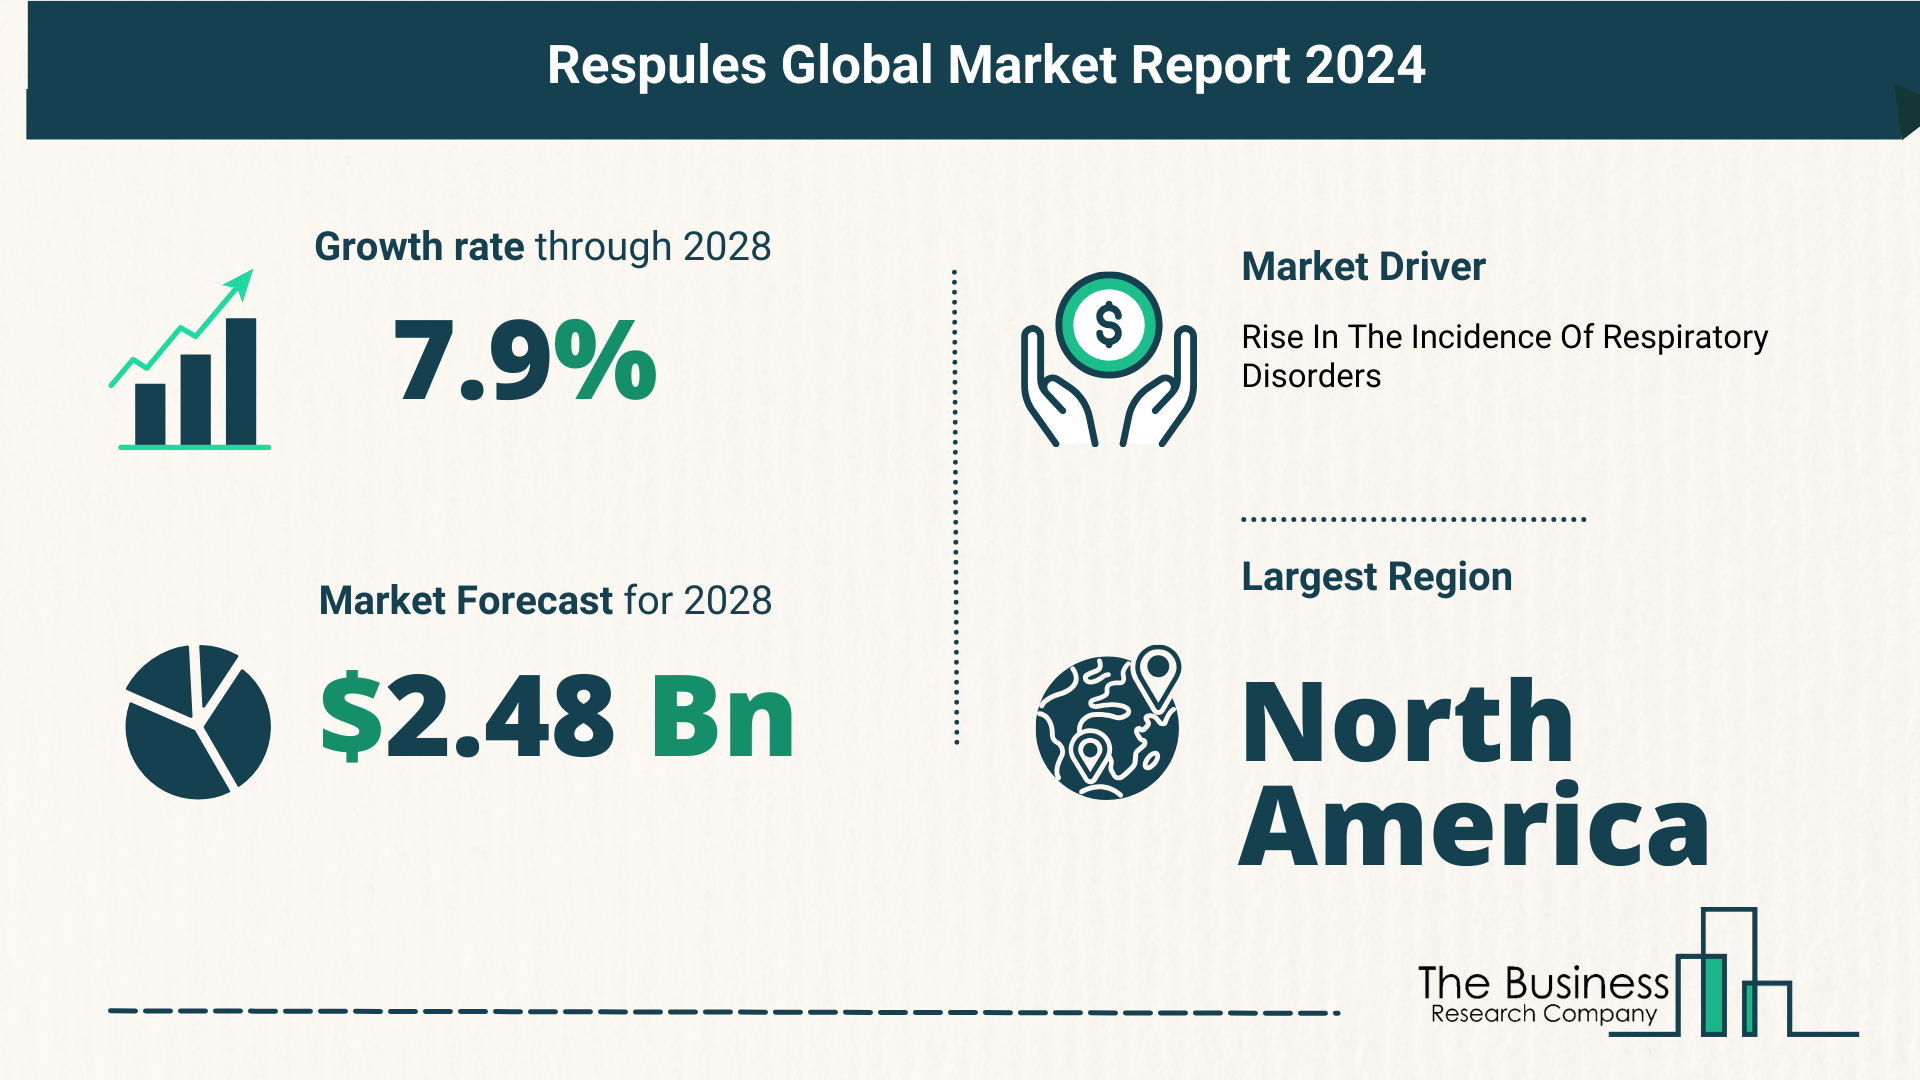 What Is The Forecast Growth Rate For The Respules Market?